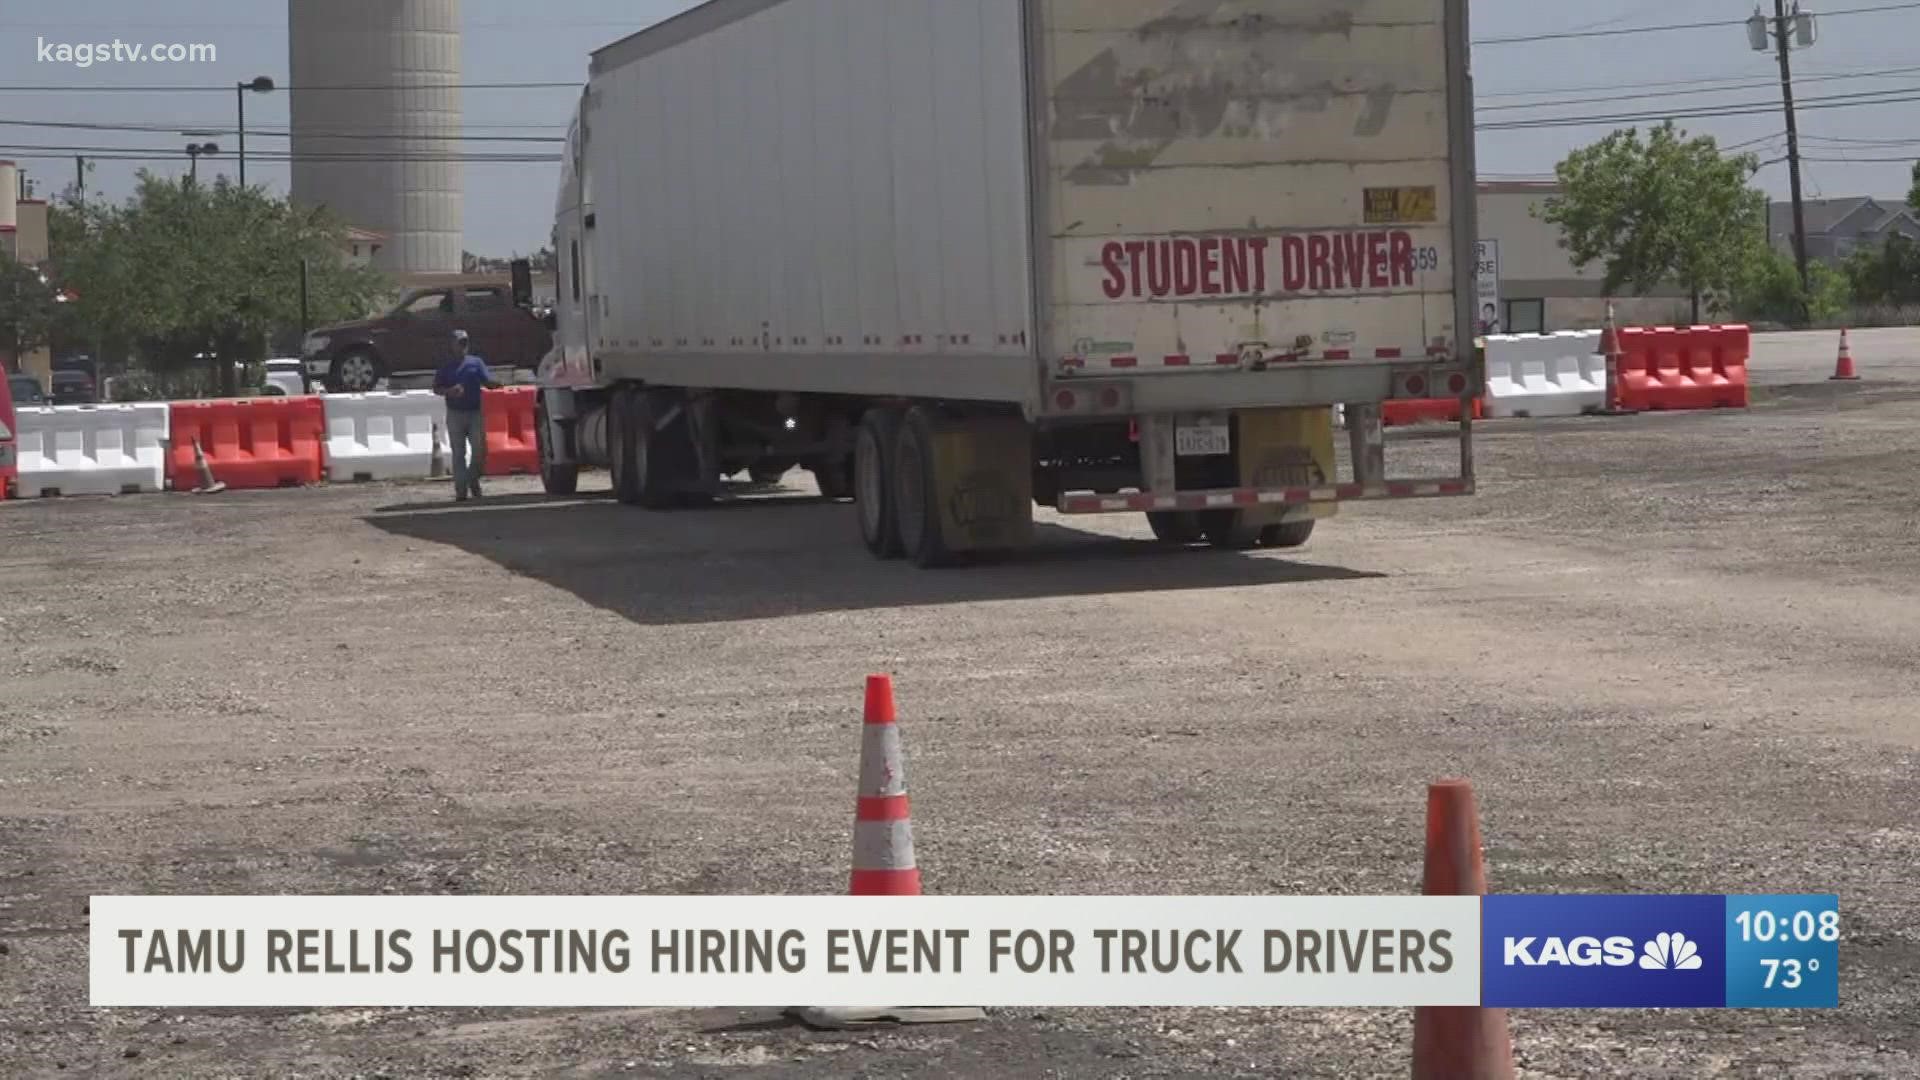 The trucking career fair is on November 13. The event will take place at the RELLIS Campus from 10 a.m. to 2 p.m.